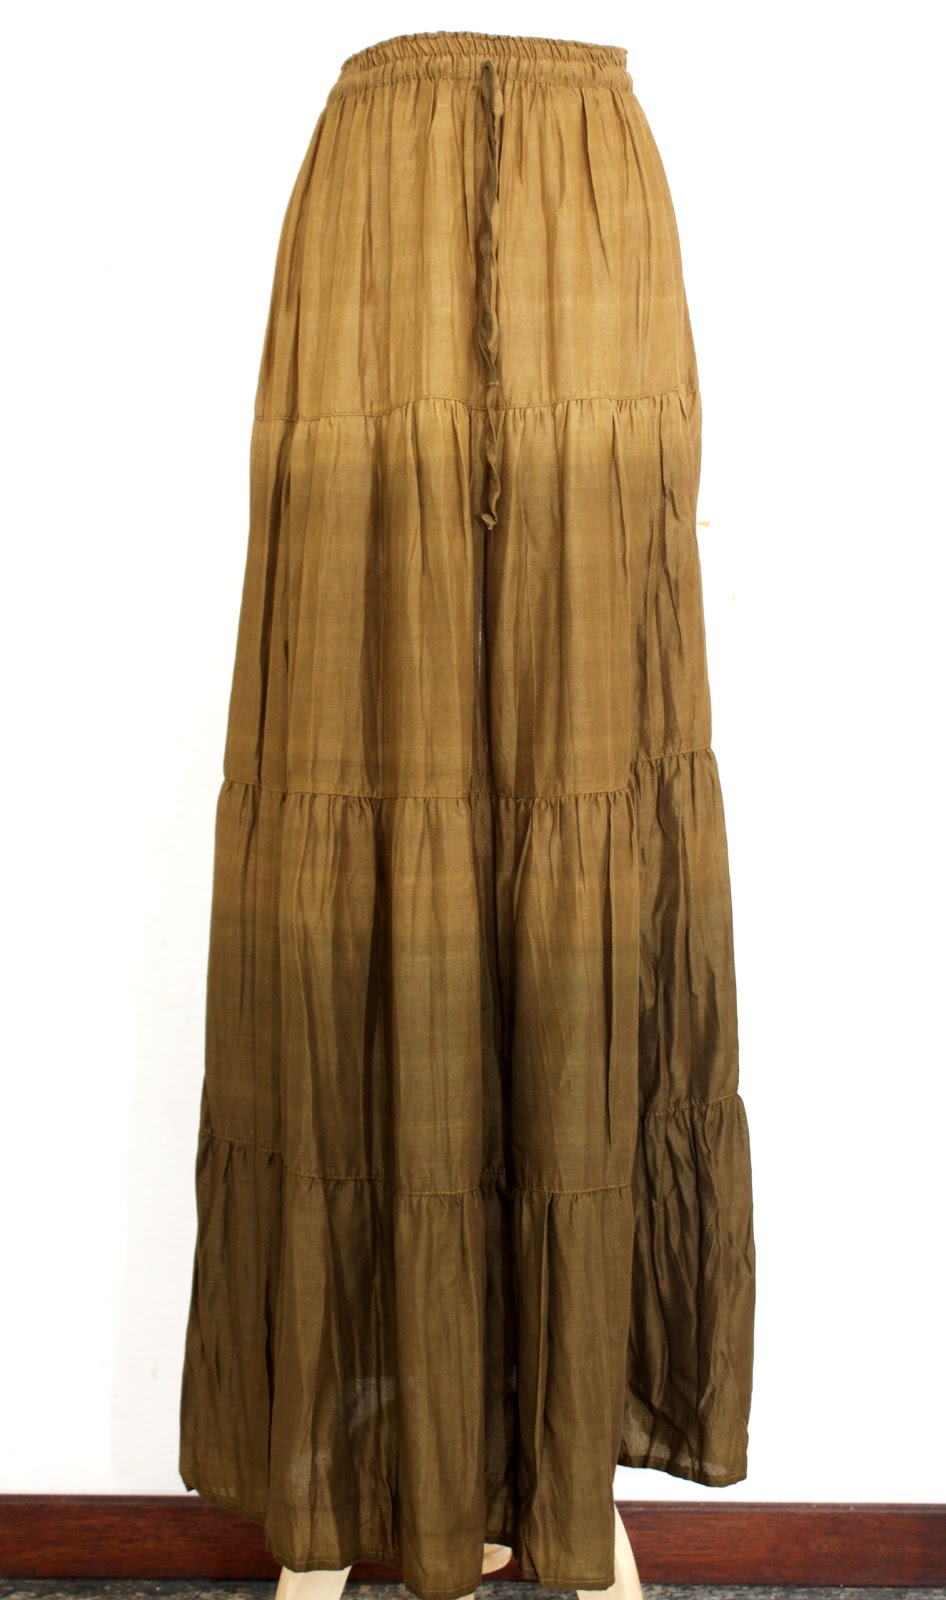 AwFit Valley Boutique: Egyptian Skirt Madness